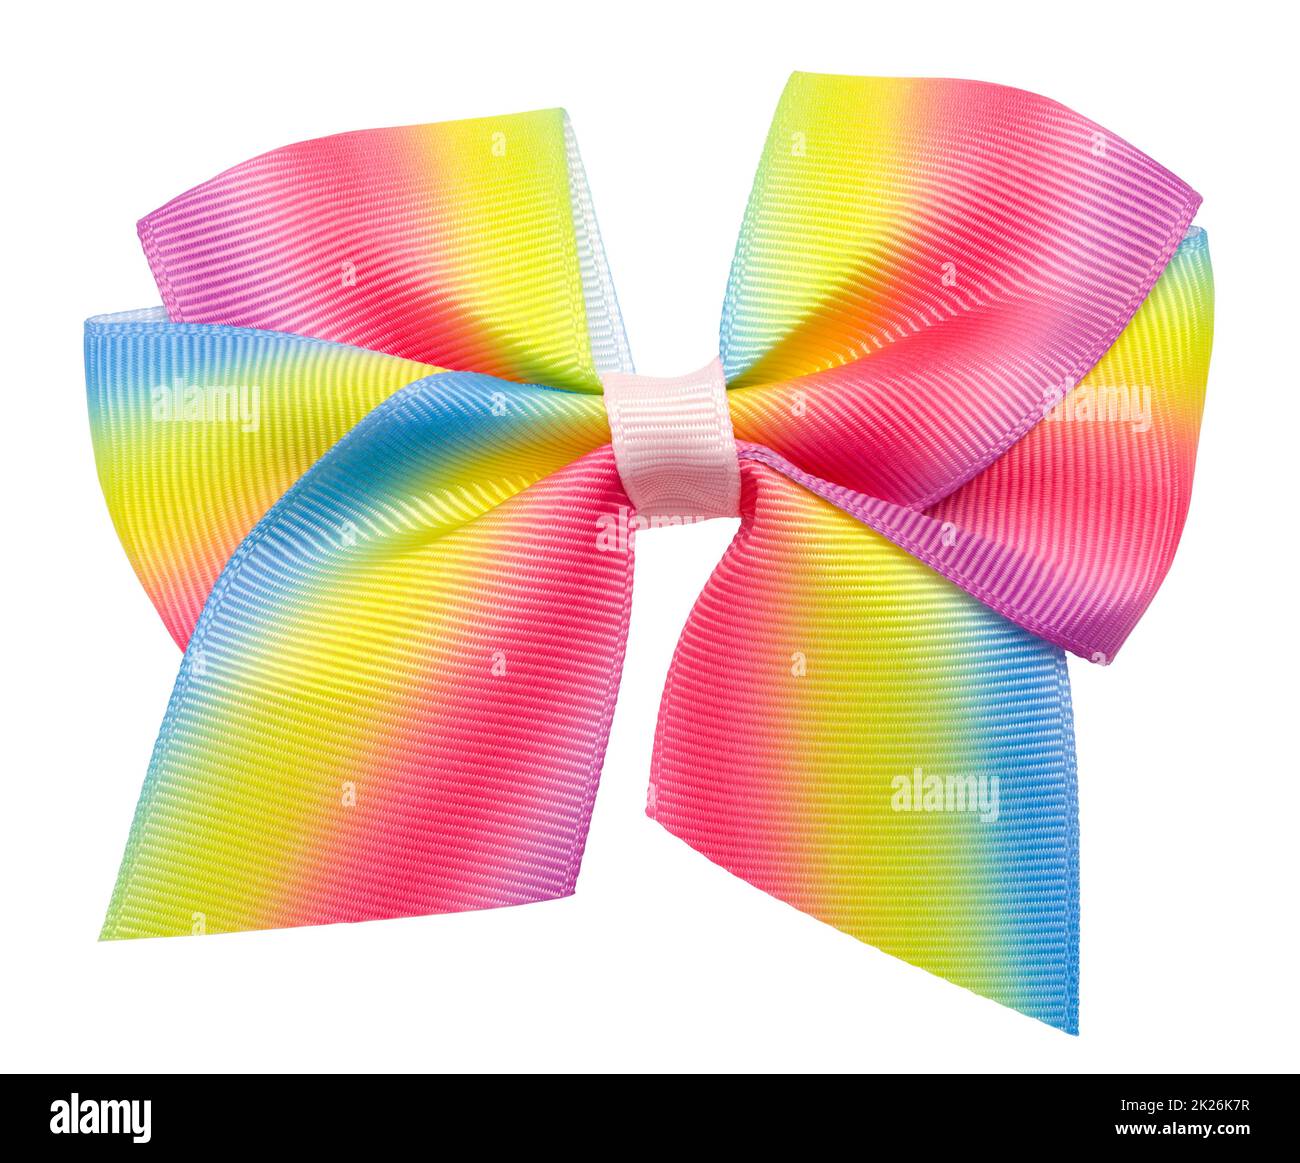 Rainbow Hair Bow Cut Out on White. Stock Photo